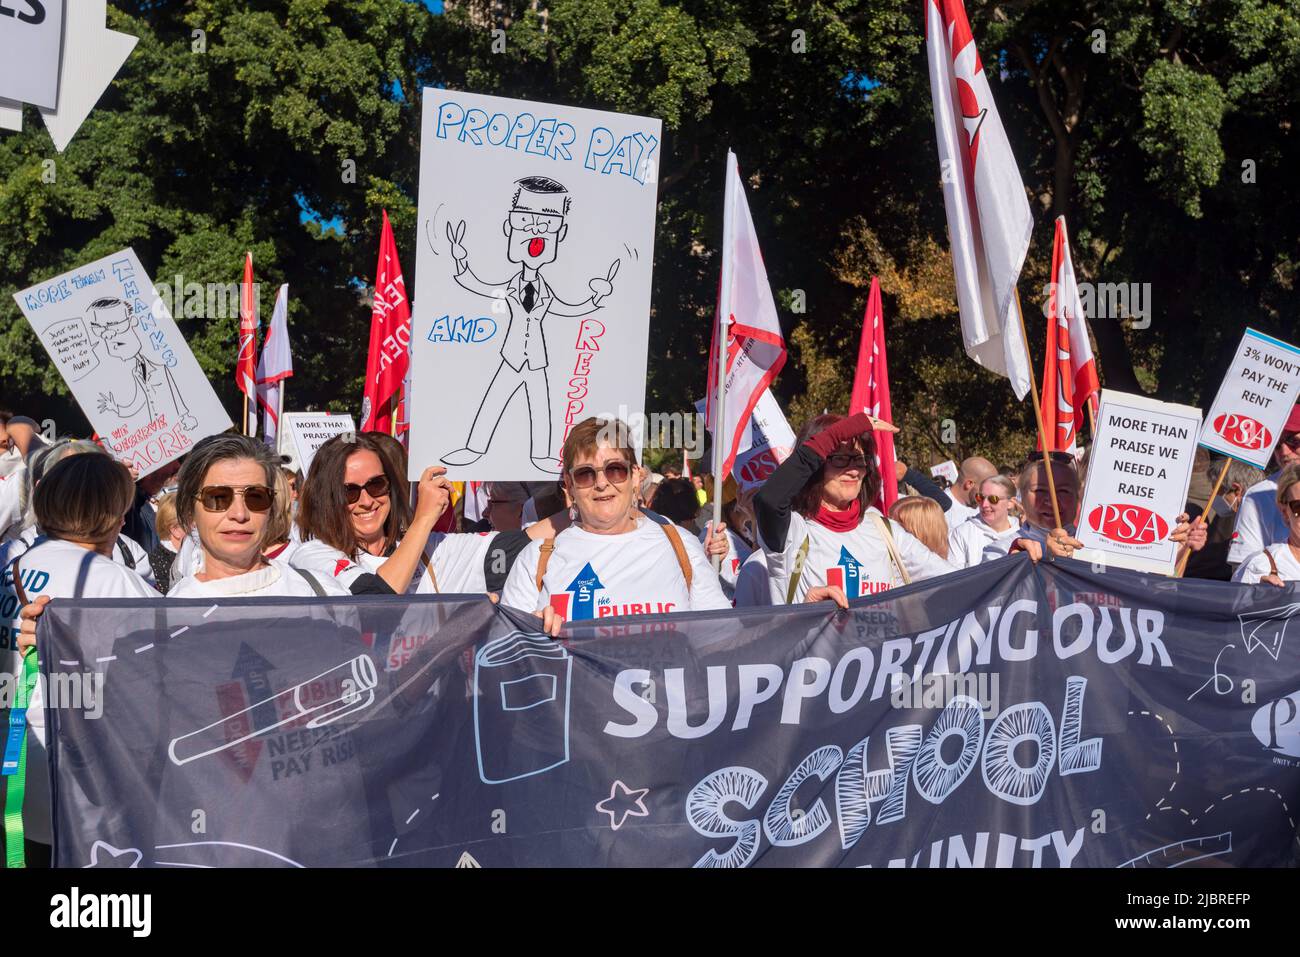 June 8th, 2022, Sydney, Australia: New South Wales Public Sector workers on a 24hr strike, marched on Parliament House in Macquarie Street, Sydney today rejecting a 3% pay rise offer and unhappy that only certain 'front line' workers were awarded an additional $3,000.00 Covid-19 bonus. Stock Photo